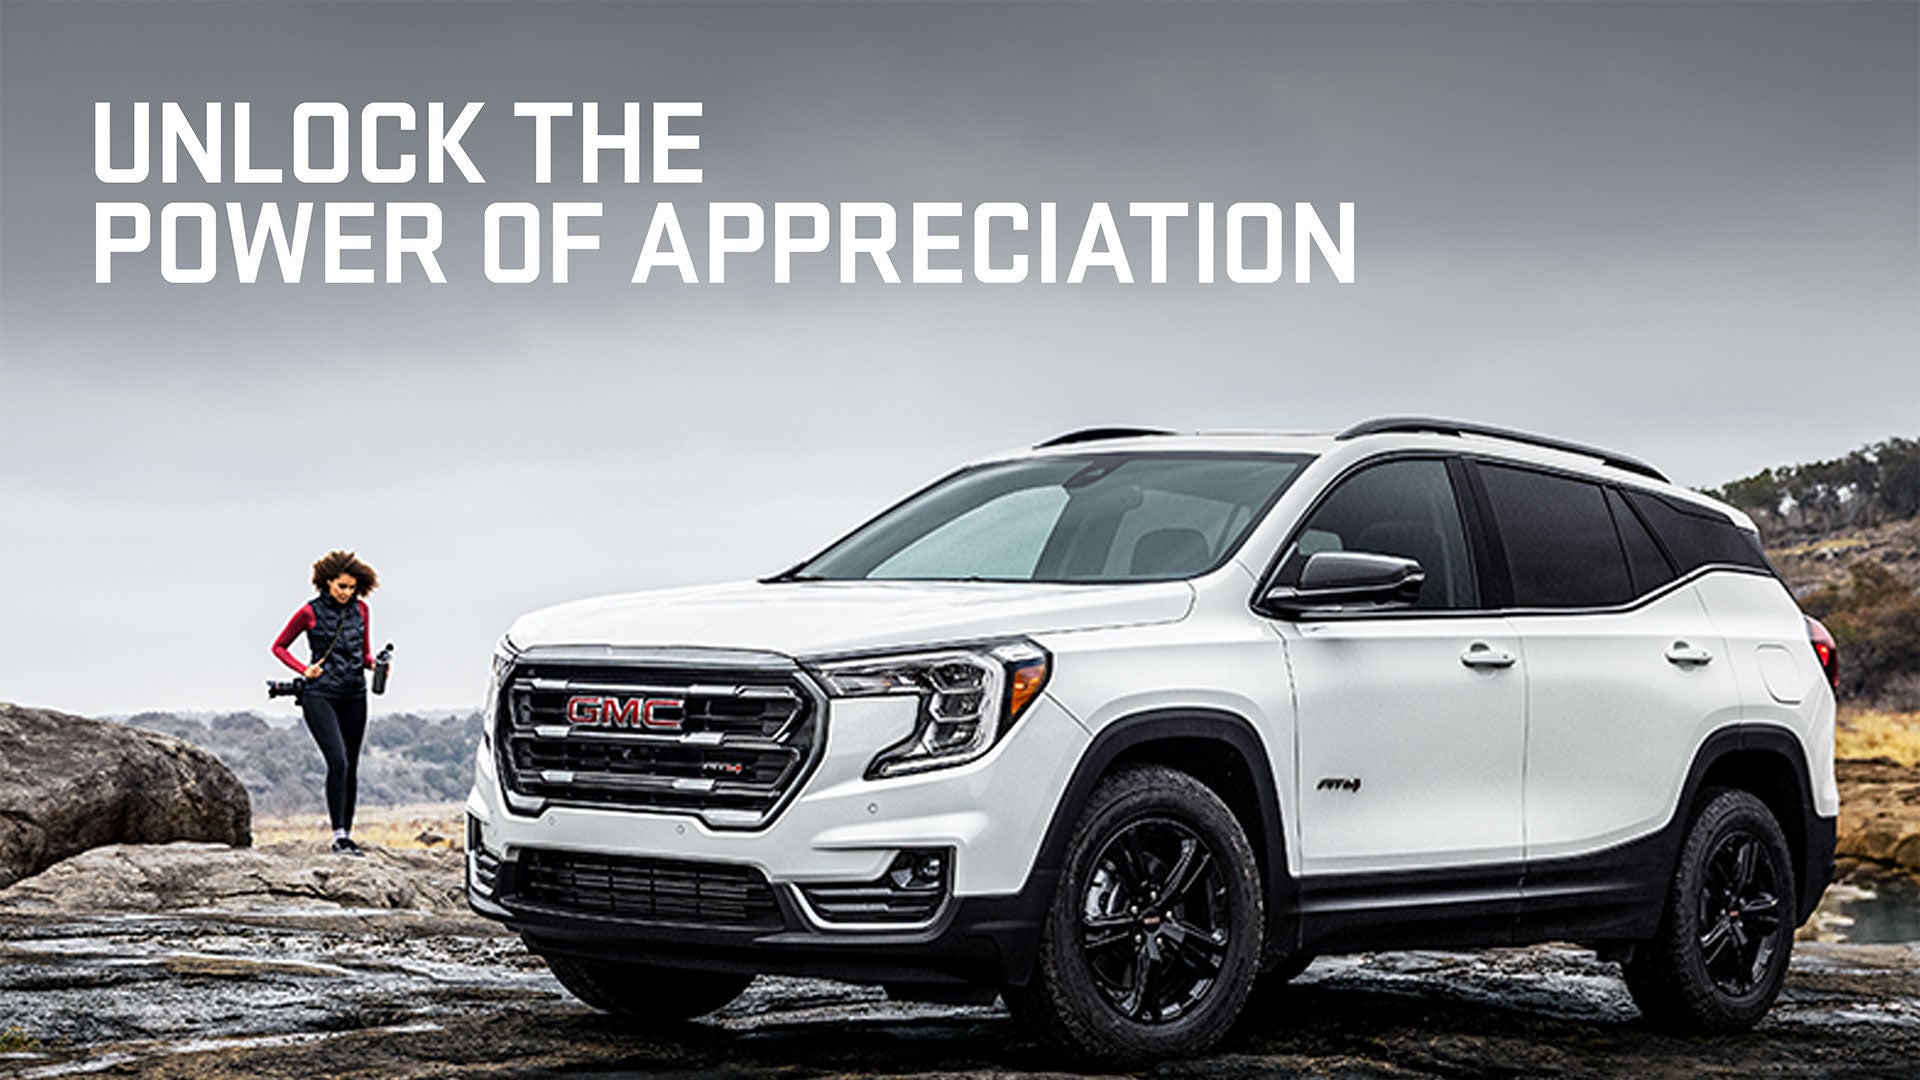 Unlock the power of appreciation | Freedom Buick GMC Greenville by Ed Morse in GREENVILLE TX